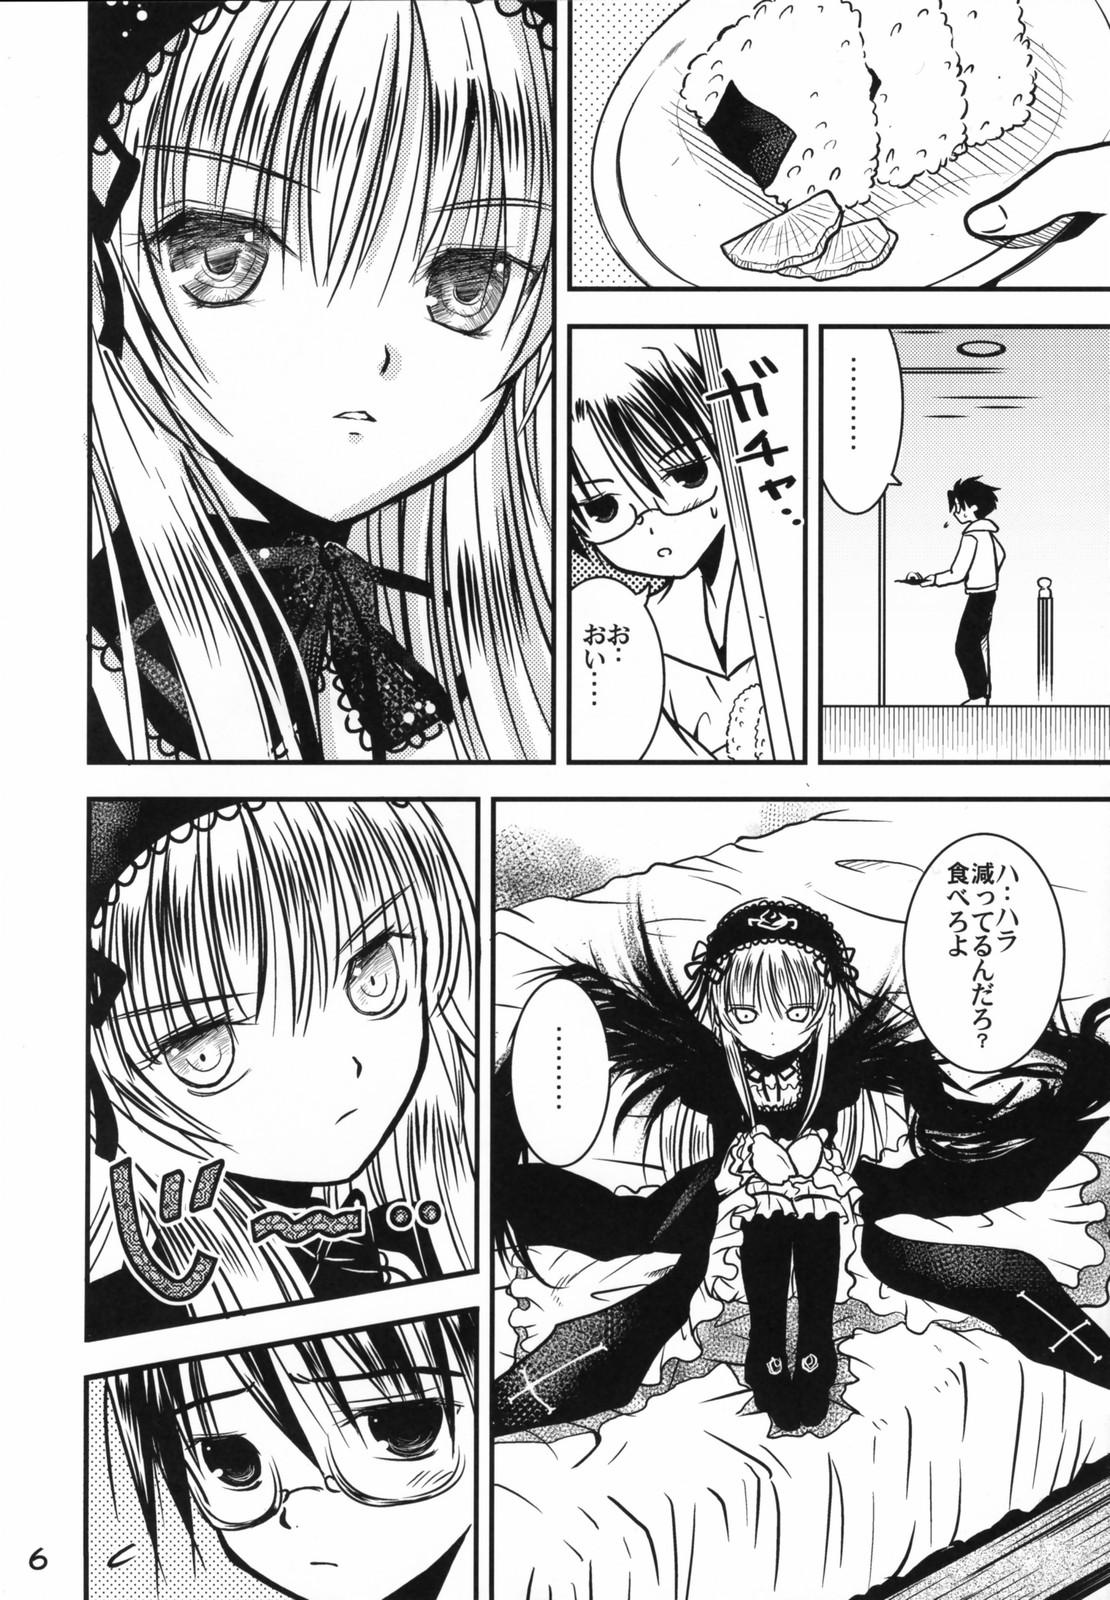 Hot Naked Girl A caprice - Rozen maiden Stepfather - Page 5